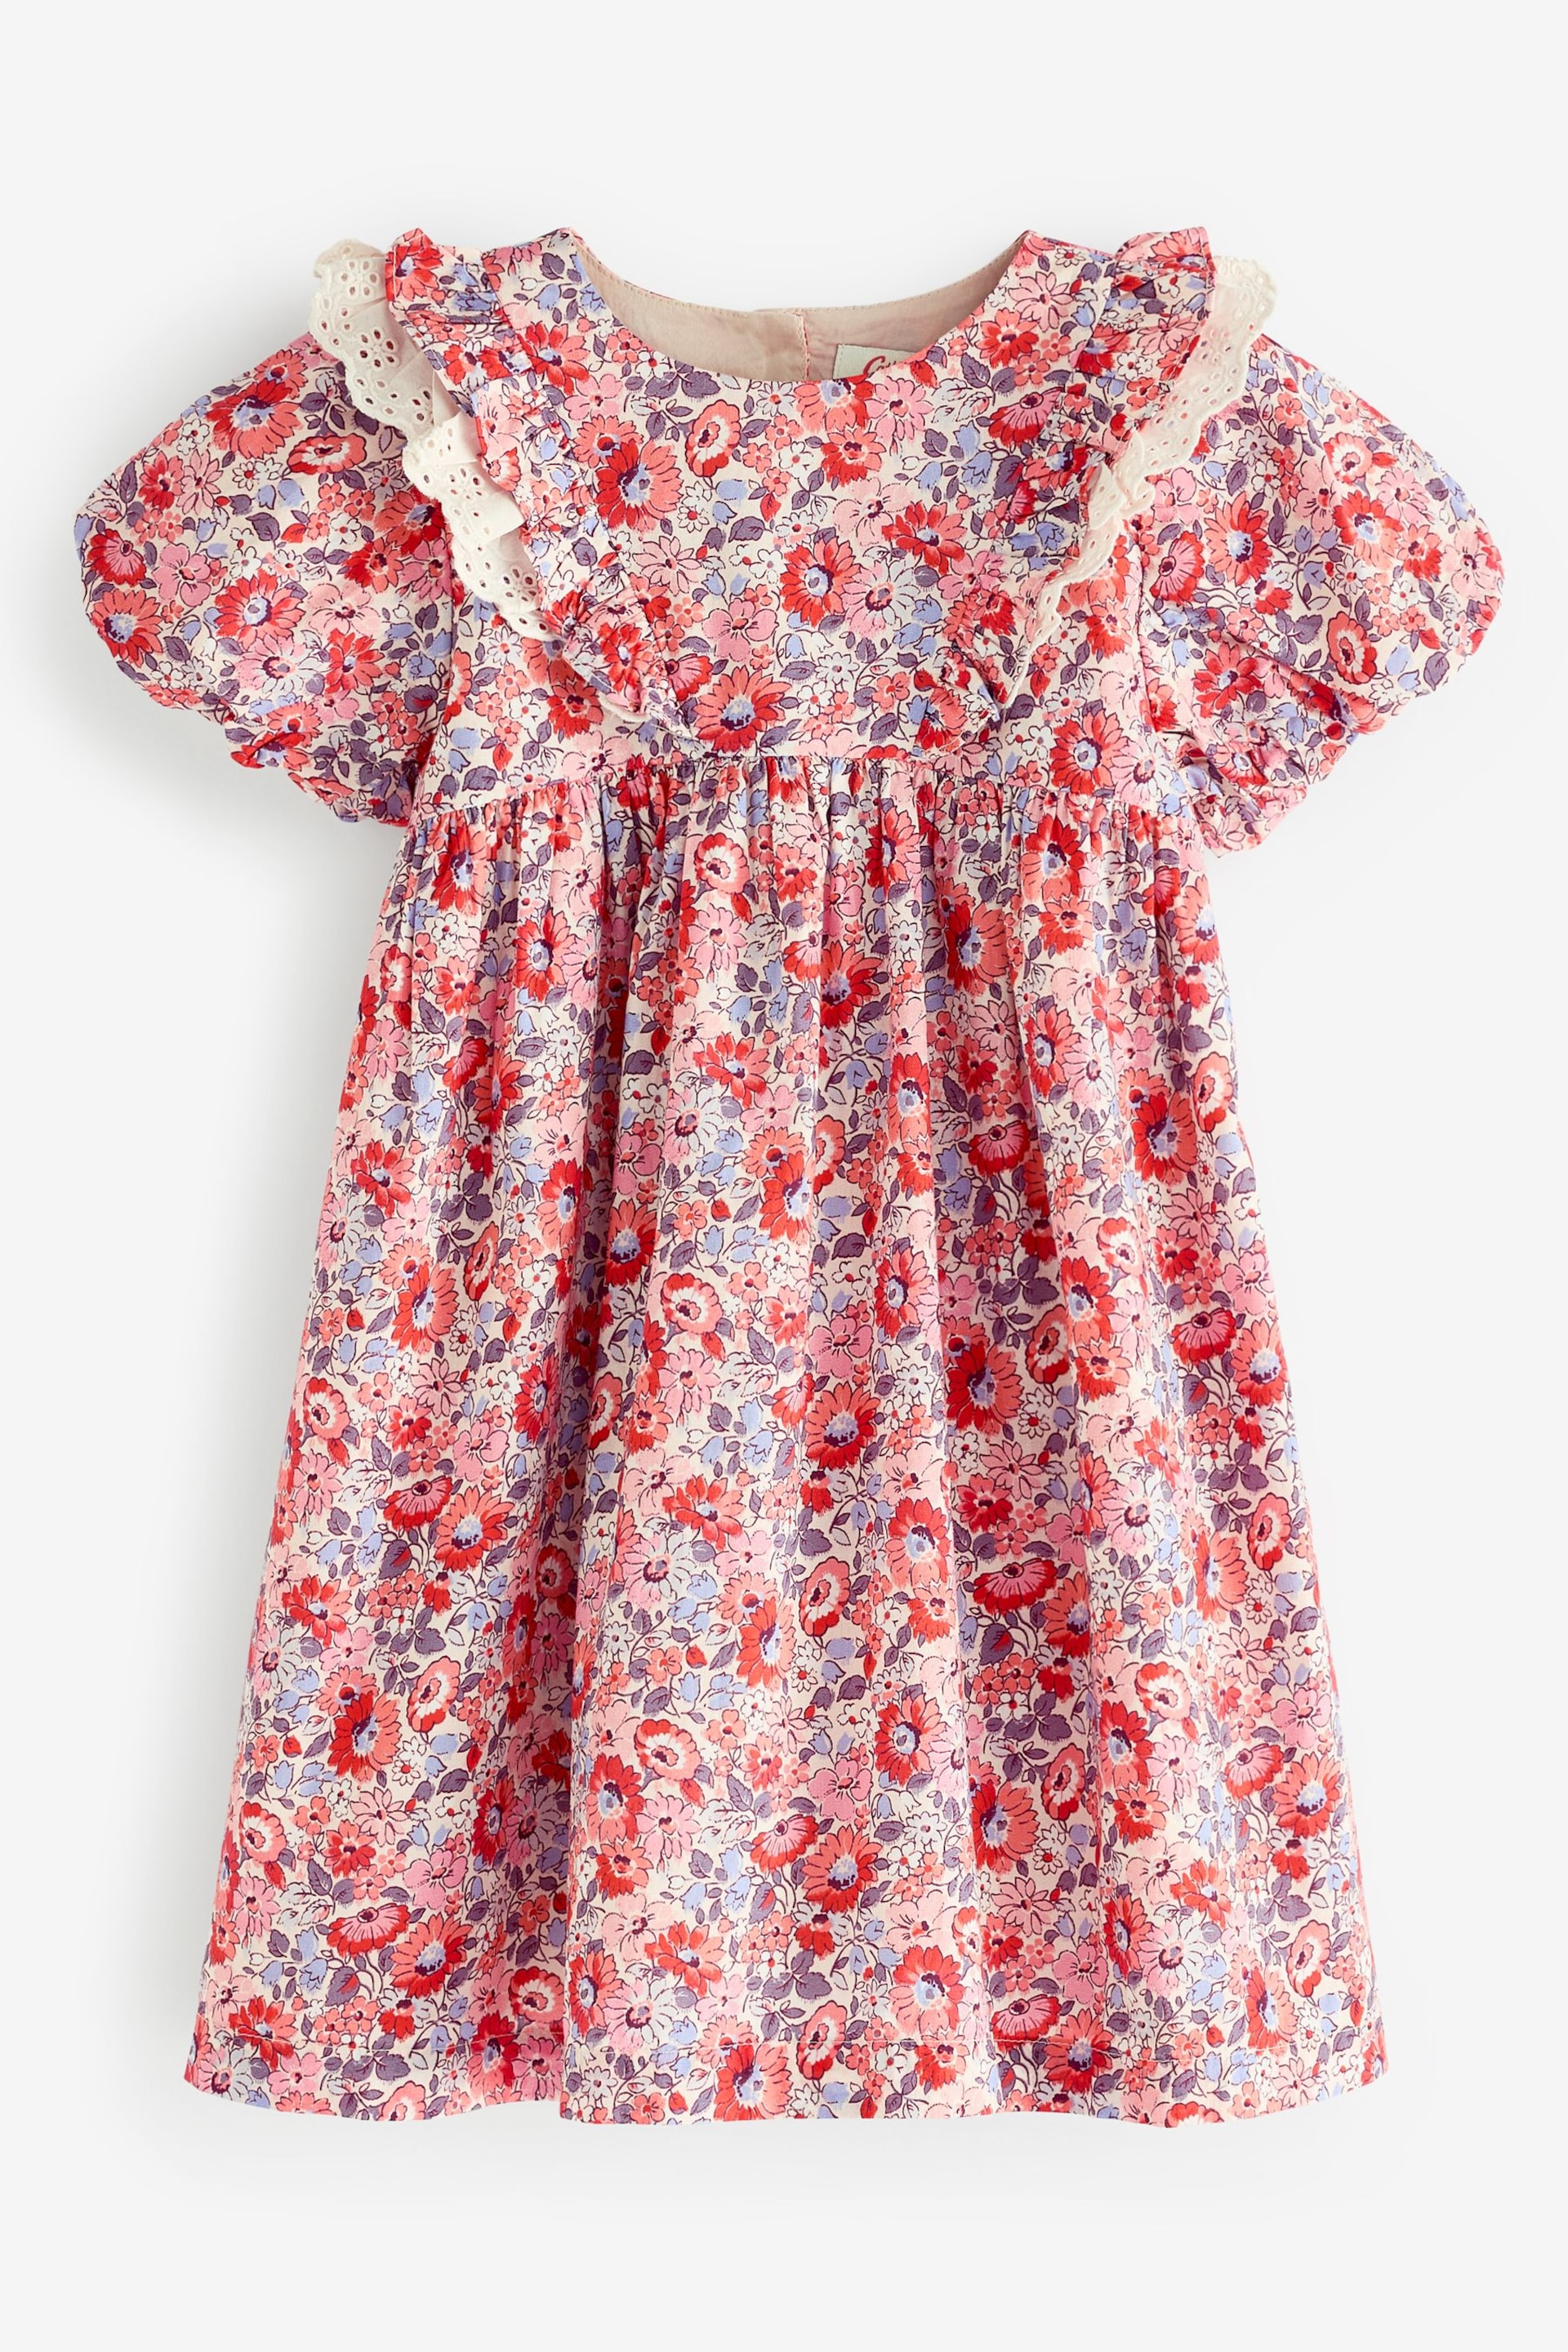 Cath Kidston Red Floral Lace Trim Dress (3mths-8yrs) - Image 5 of 7